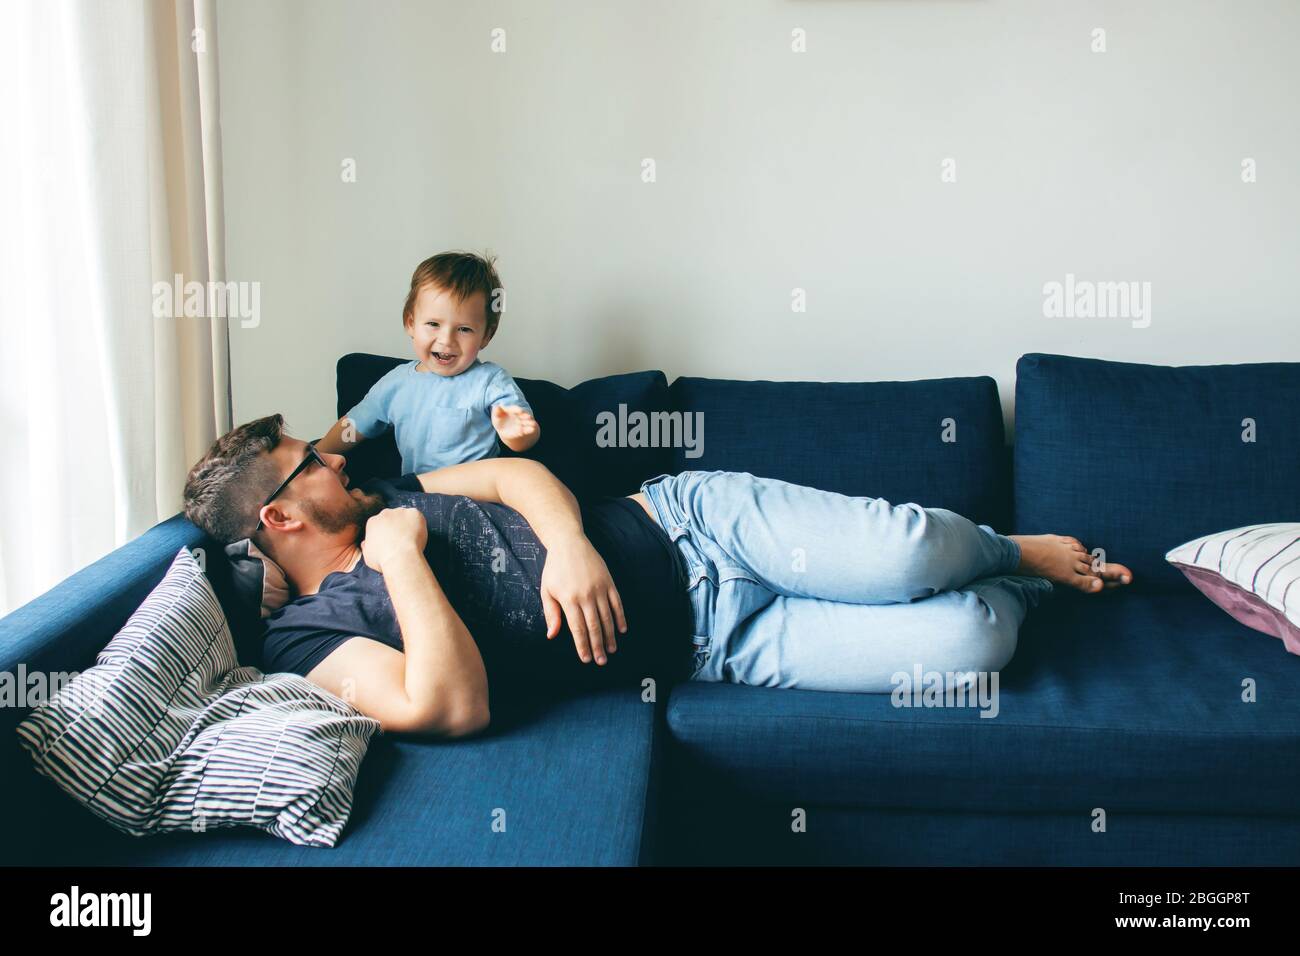 Dad is playing with his son. The baby is laughing. The concept of communication between dads and children, entertainment in quarantine, stay at home. Stock Photo